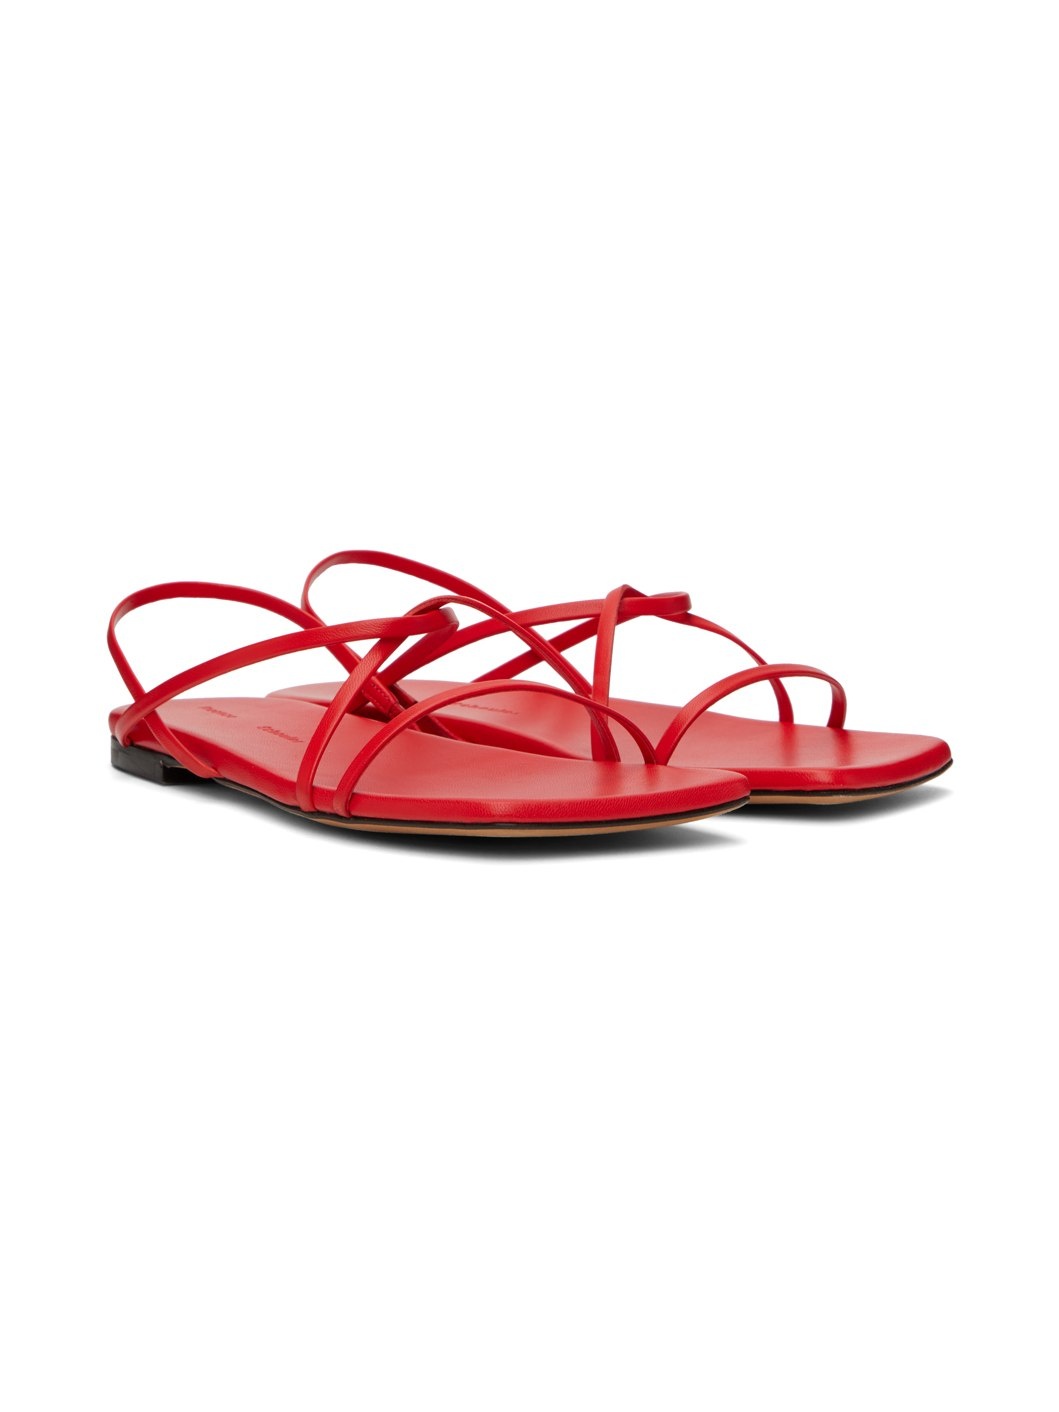 Red Square Flat Strappy Sandals - 4